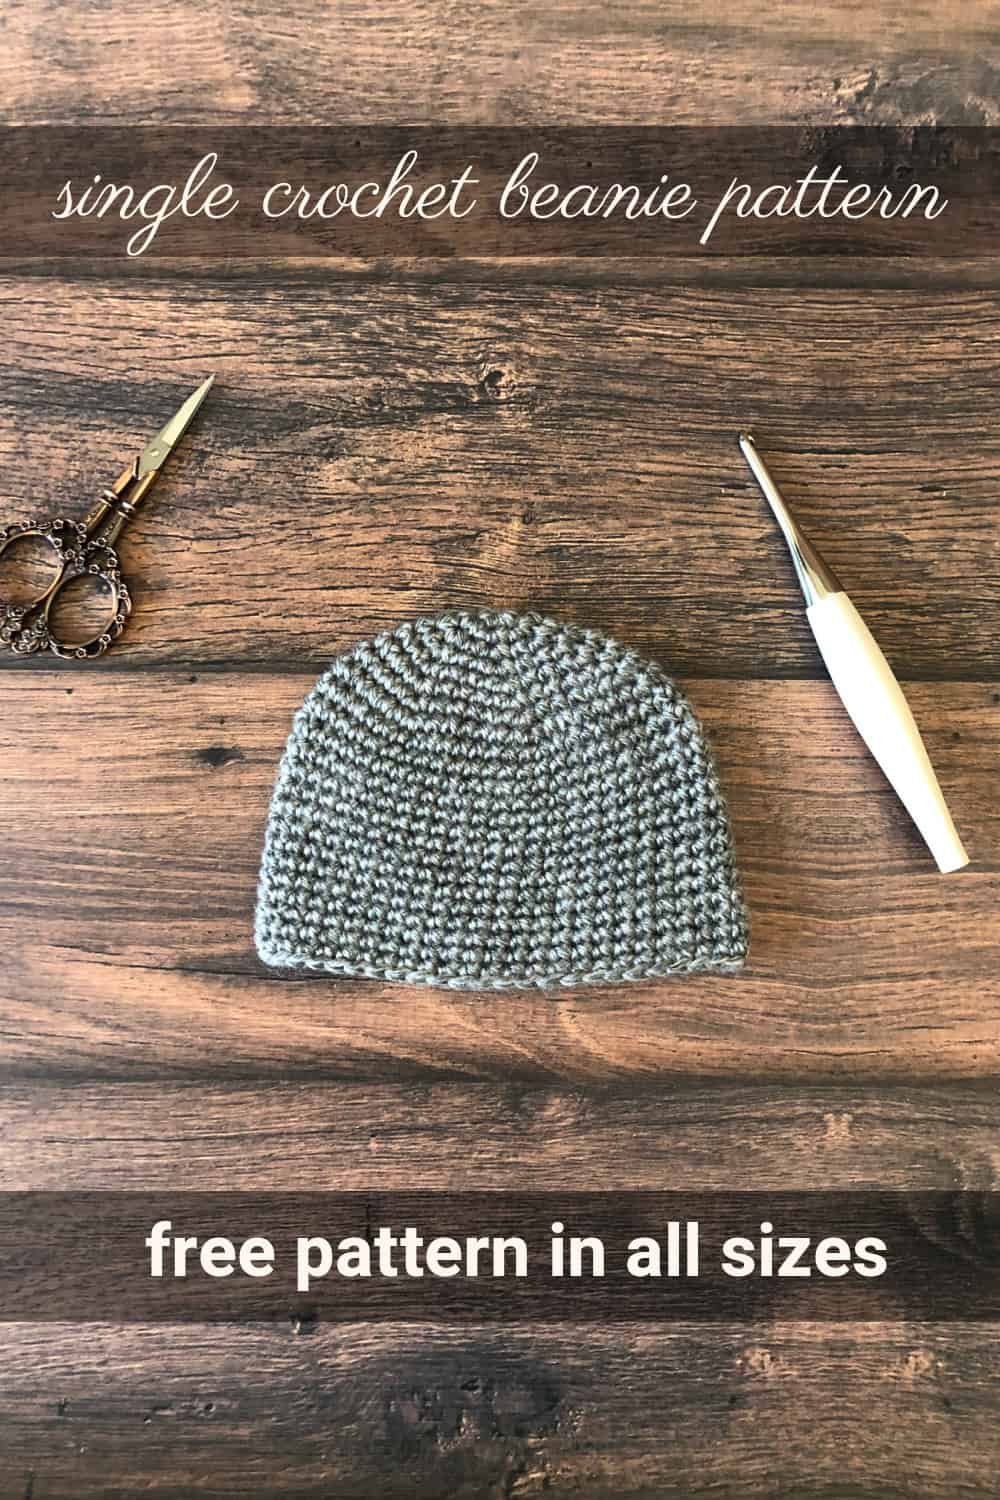 Pin image of grey crochet hat with text single crochet beanie free pattern all sizes.